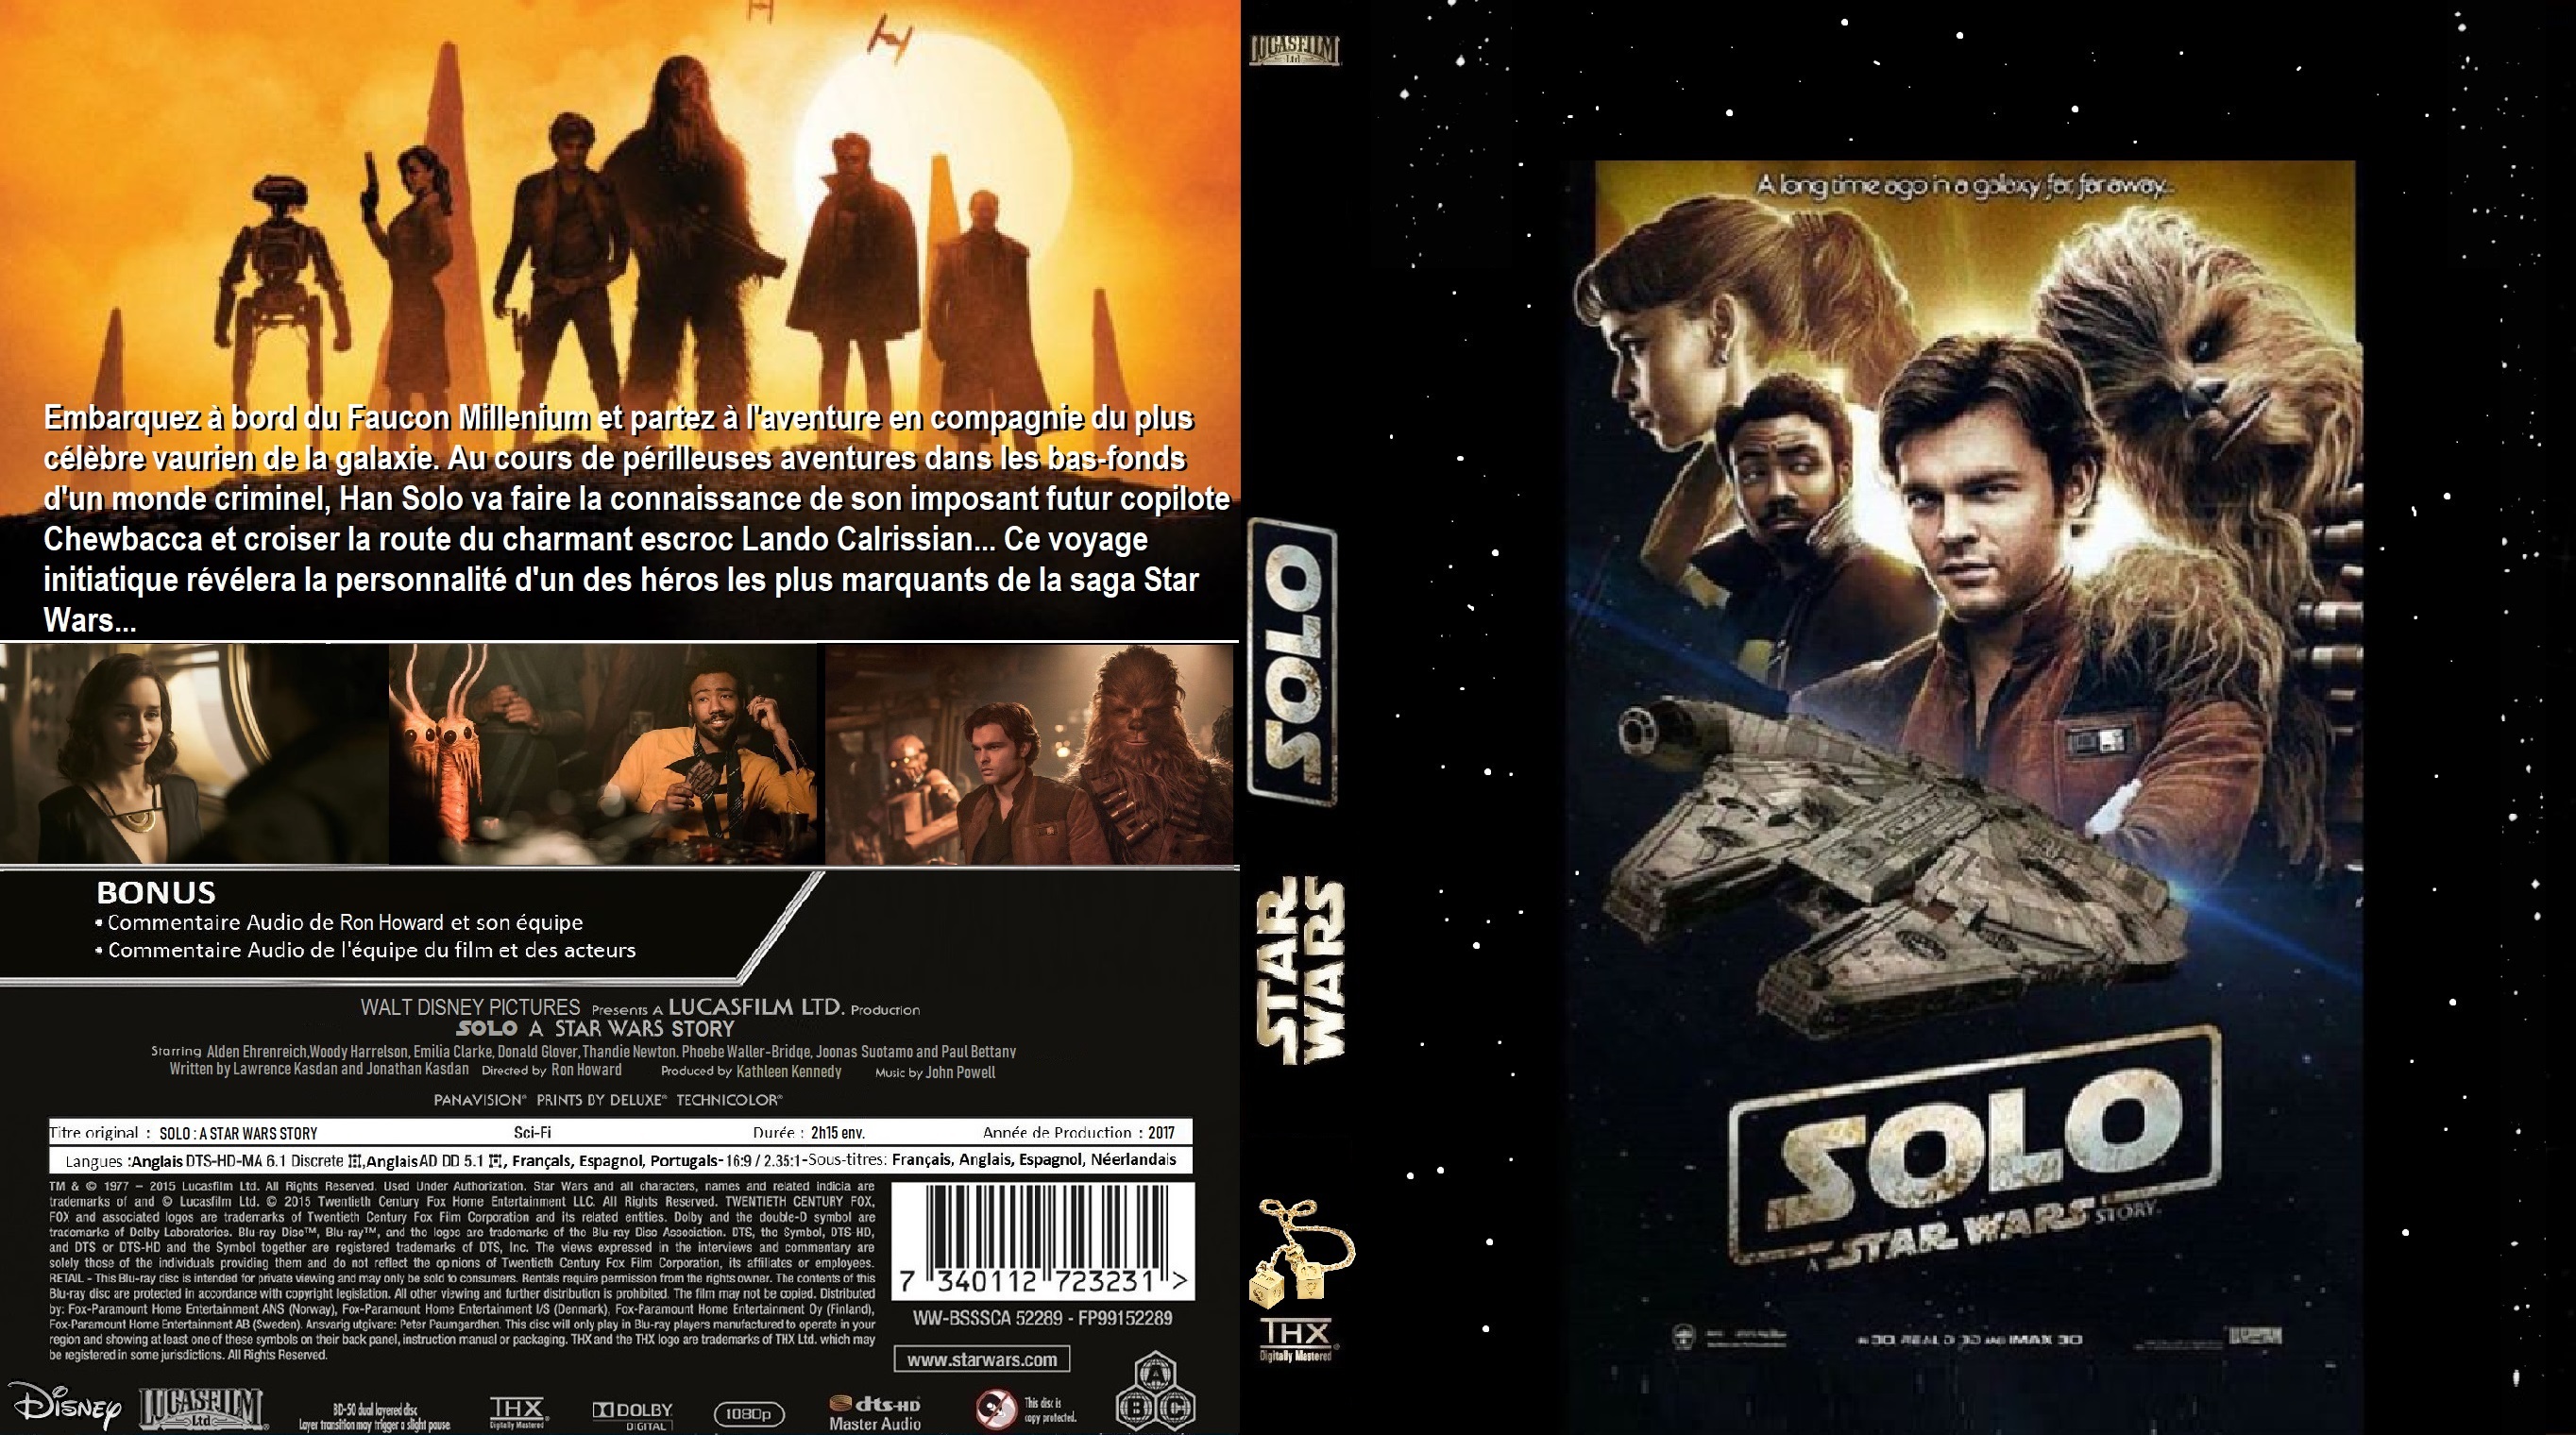 Jaquette DVD Solo: A Star Wars Story custom (BLU-RAY)